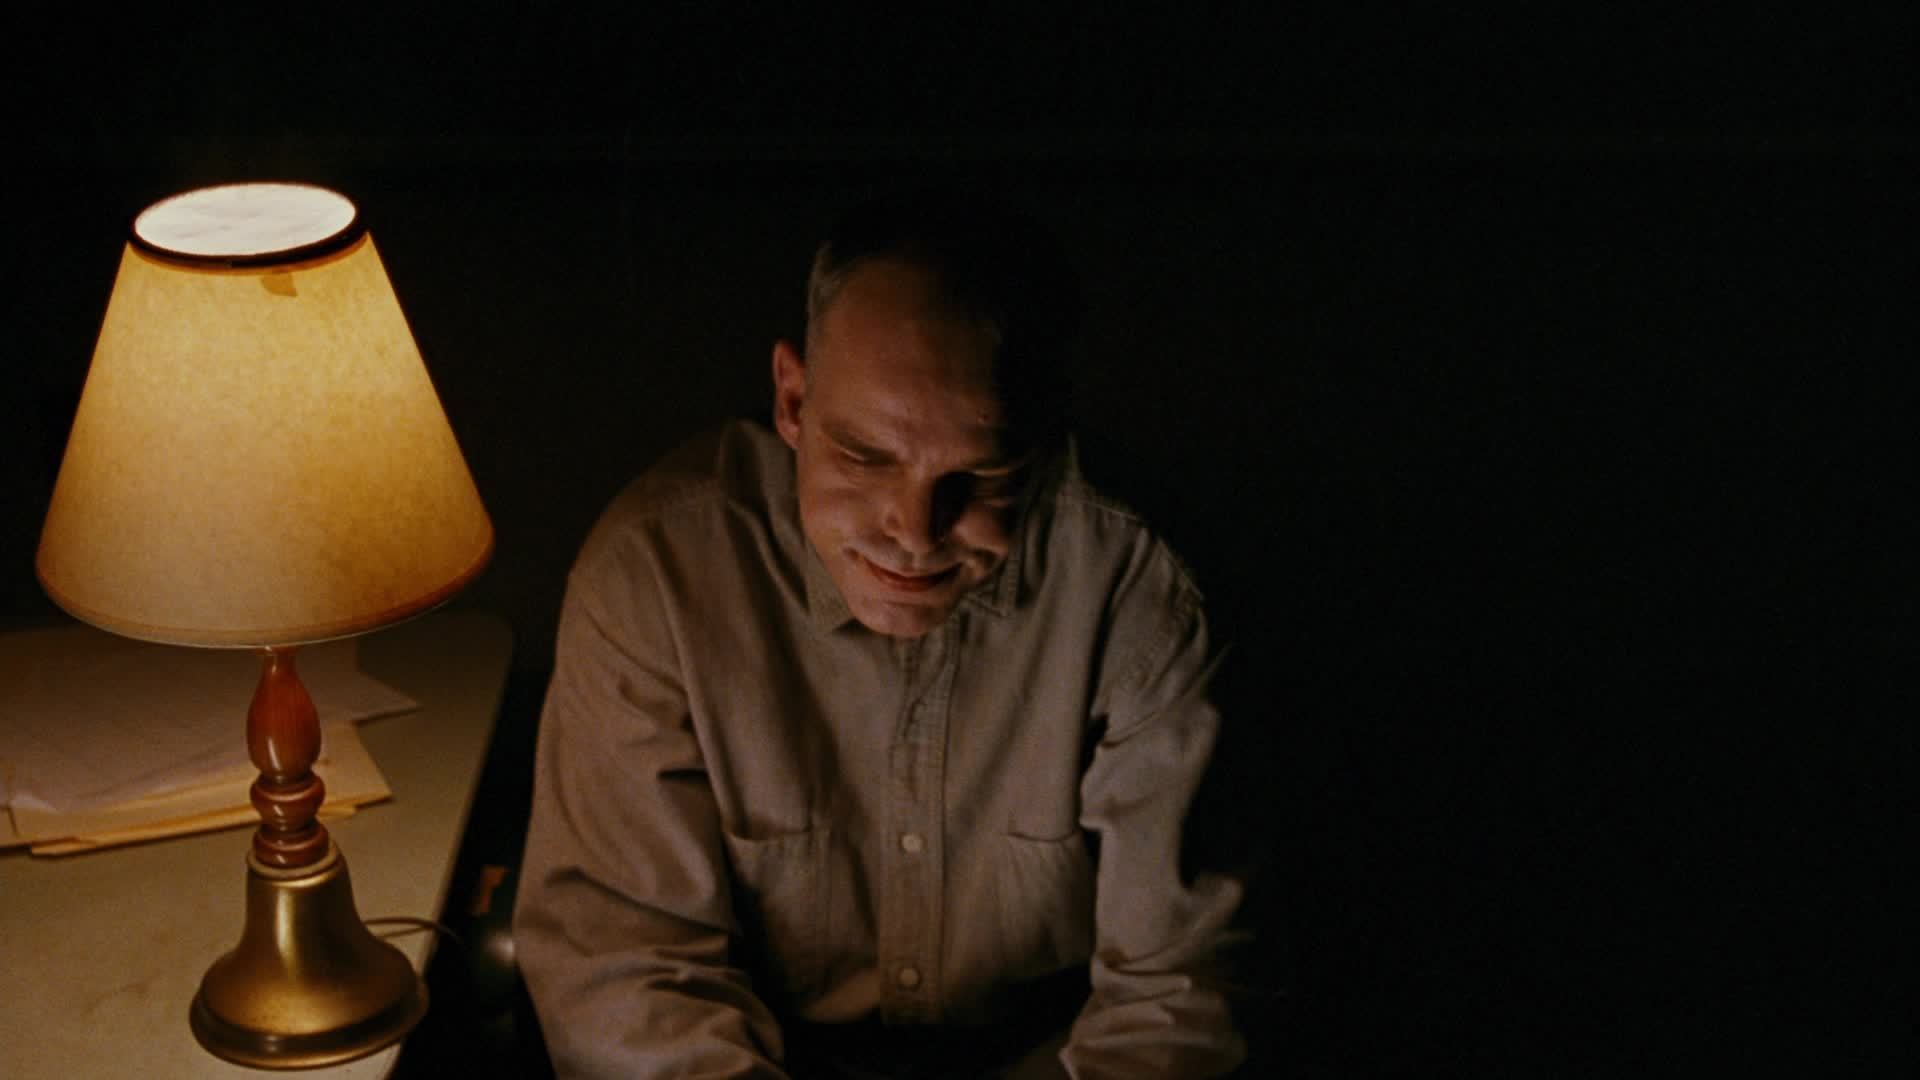 Sling Blade Official Site Miramax